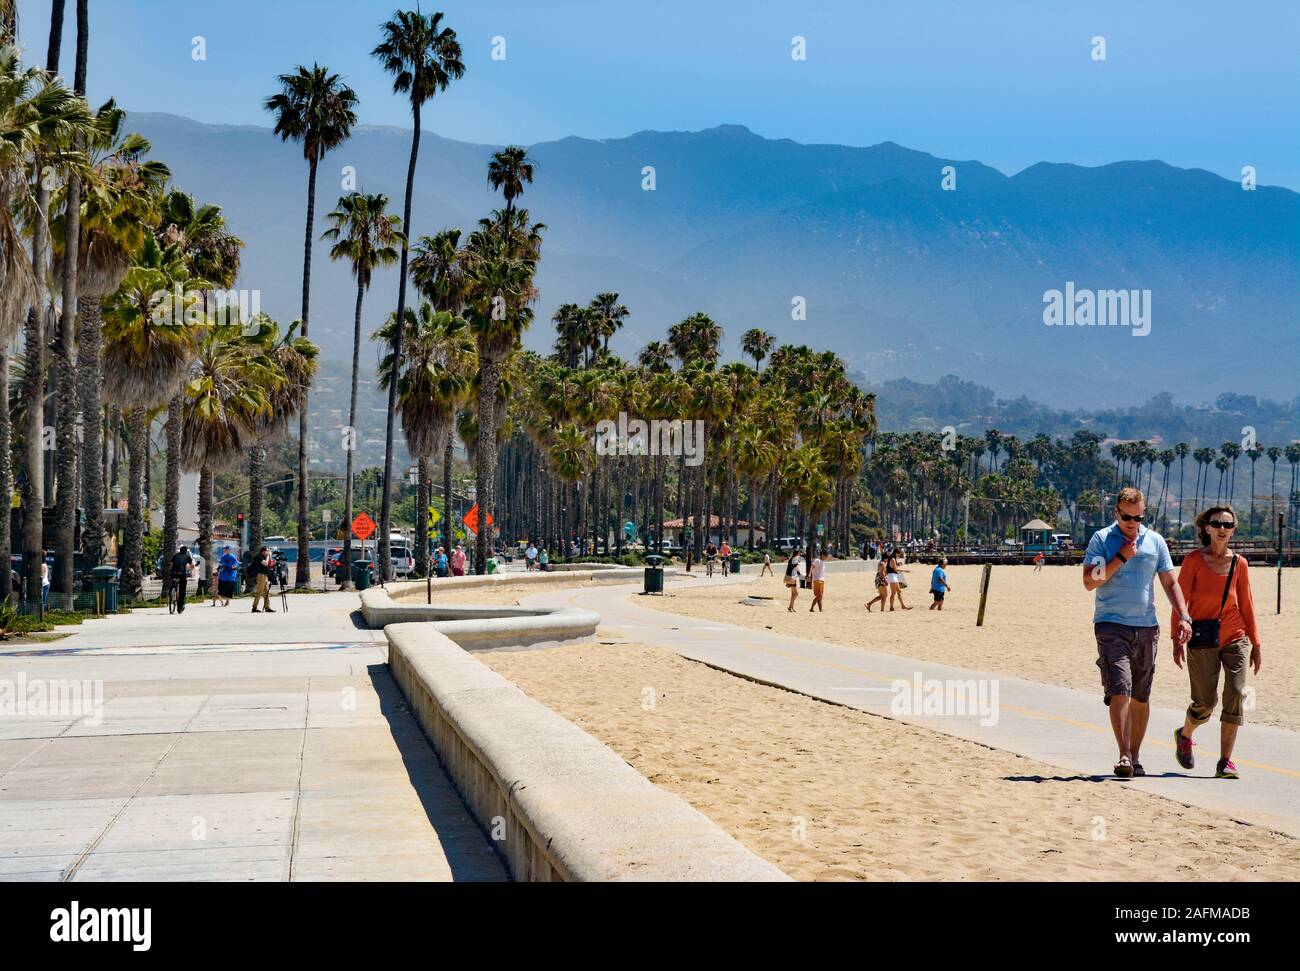 A couple walks along a pathway on the beach  along side palm tree lined Cabrillio Boulevard in Santa Barbara, CA, Stock Photo